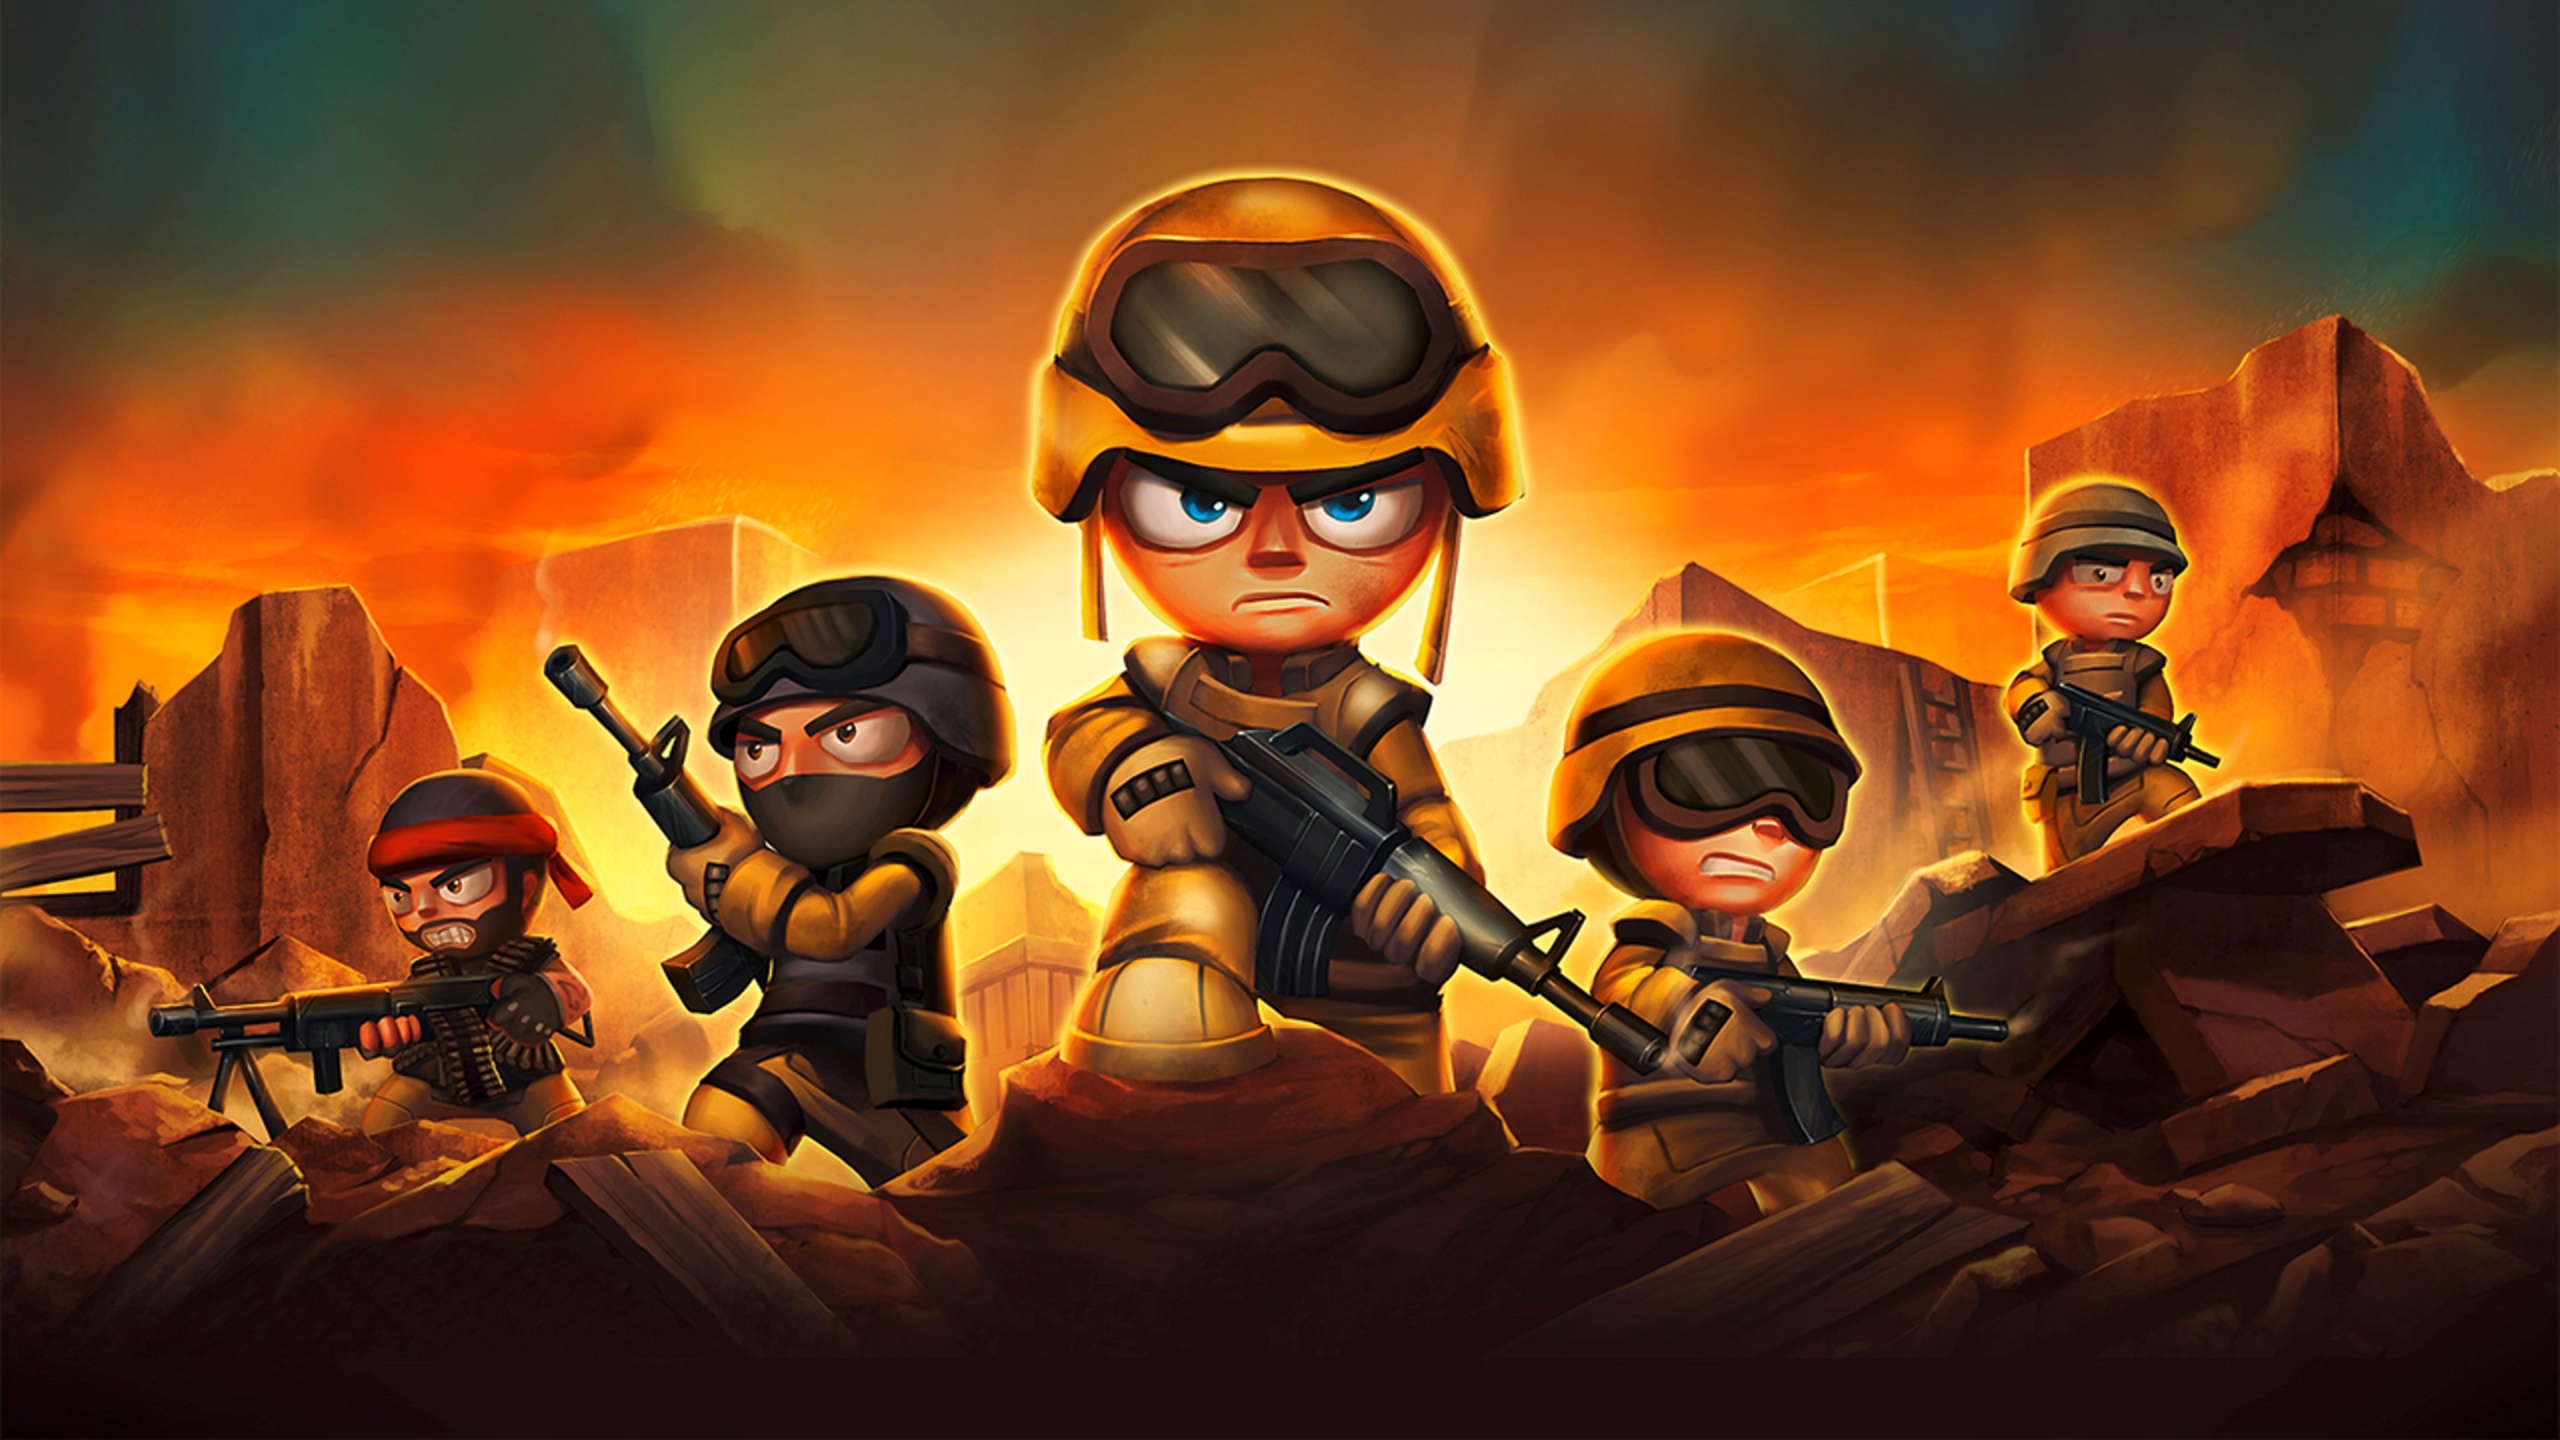 download the new for android Tiny Troopers Joint Ops XL